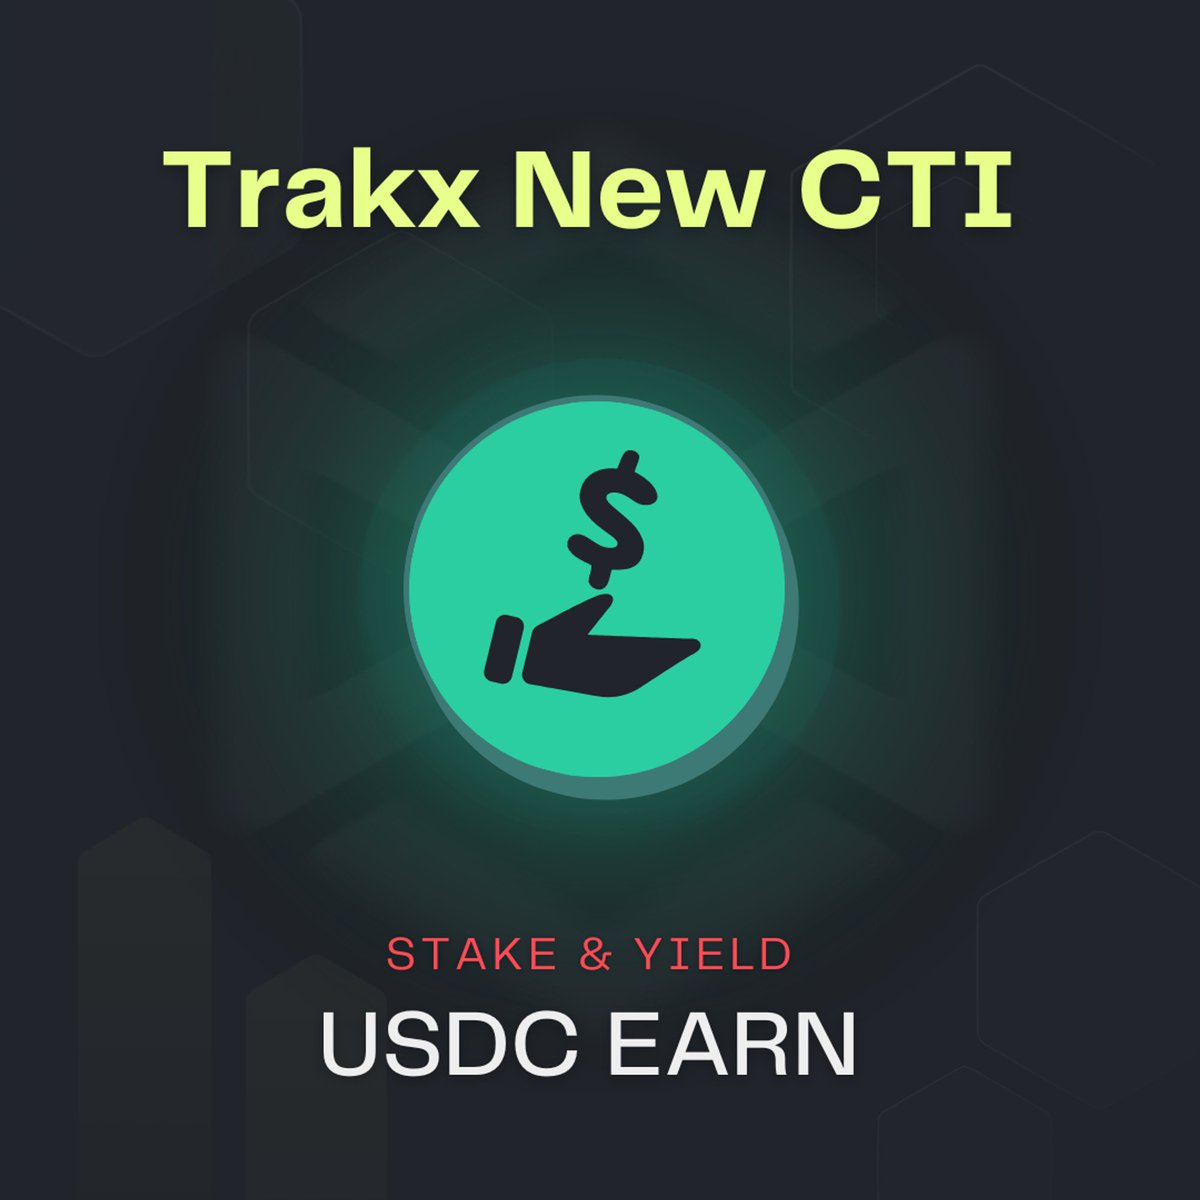 The USDc Earn CTI has just been launched! 💲

Developed in collaboration with @opentrade_io, this CTI offers a seamless avenue to earn US Treasury Bills (T-Bills) like returns, ensuring the utmost security and institutional-grade asset management.

Learn more 👇